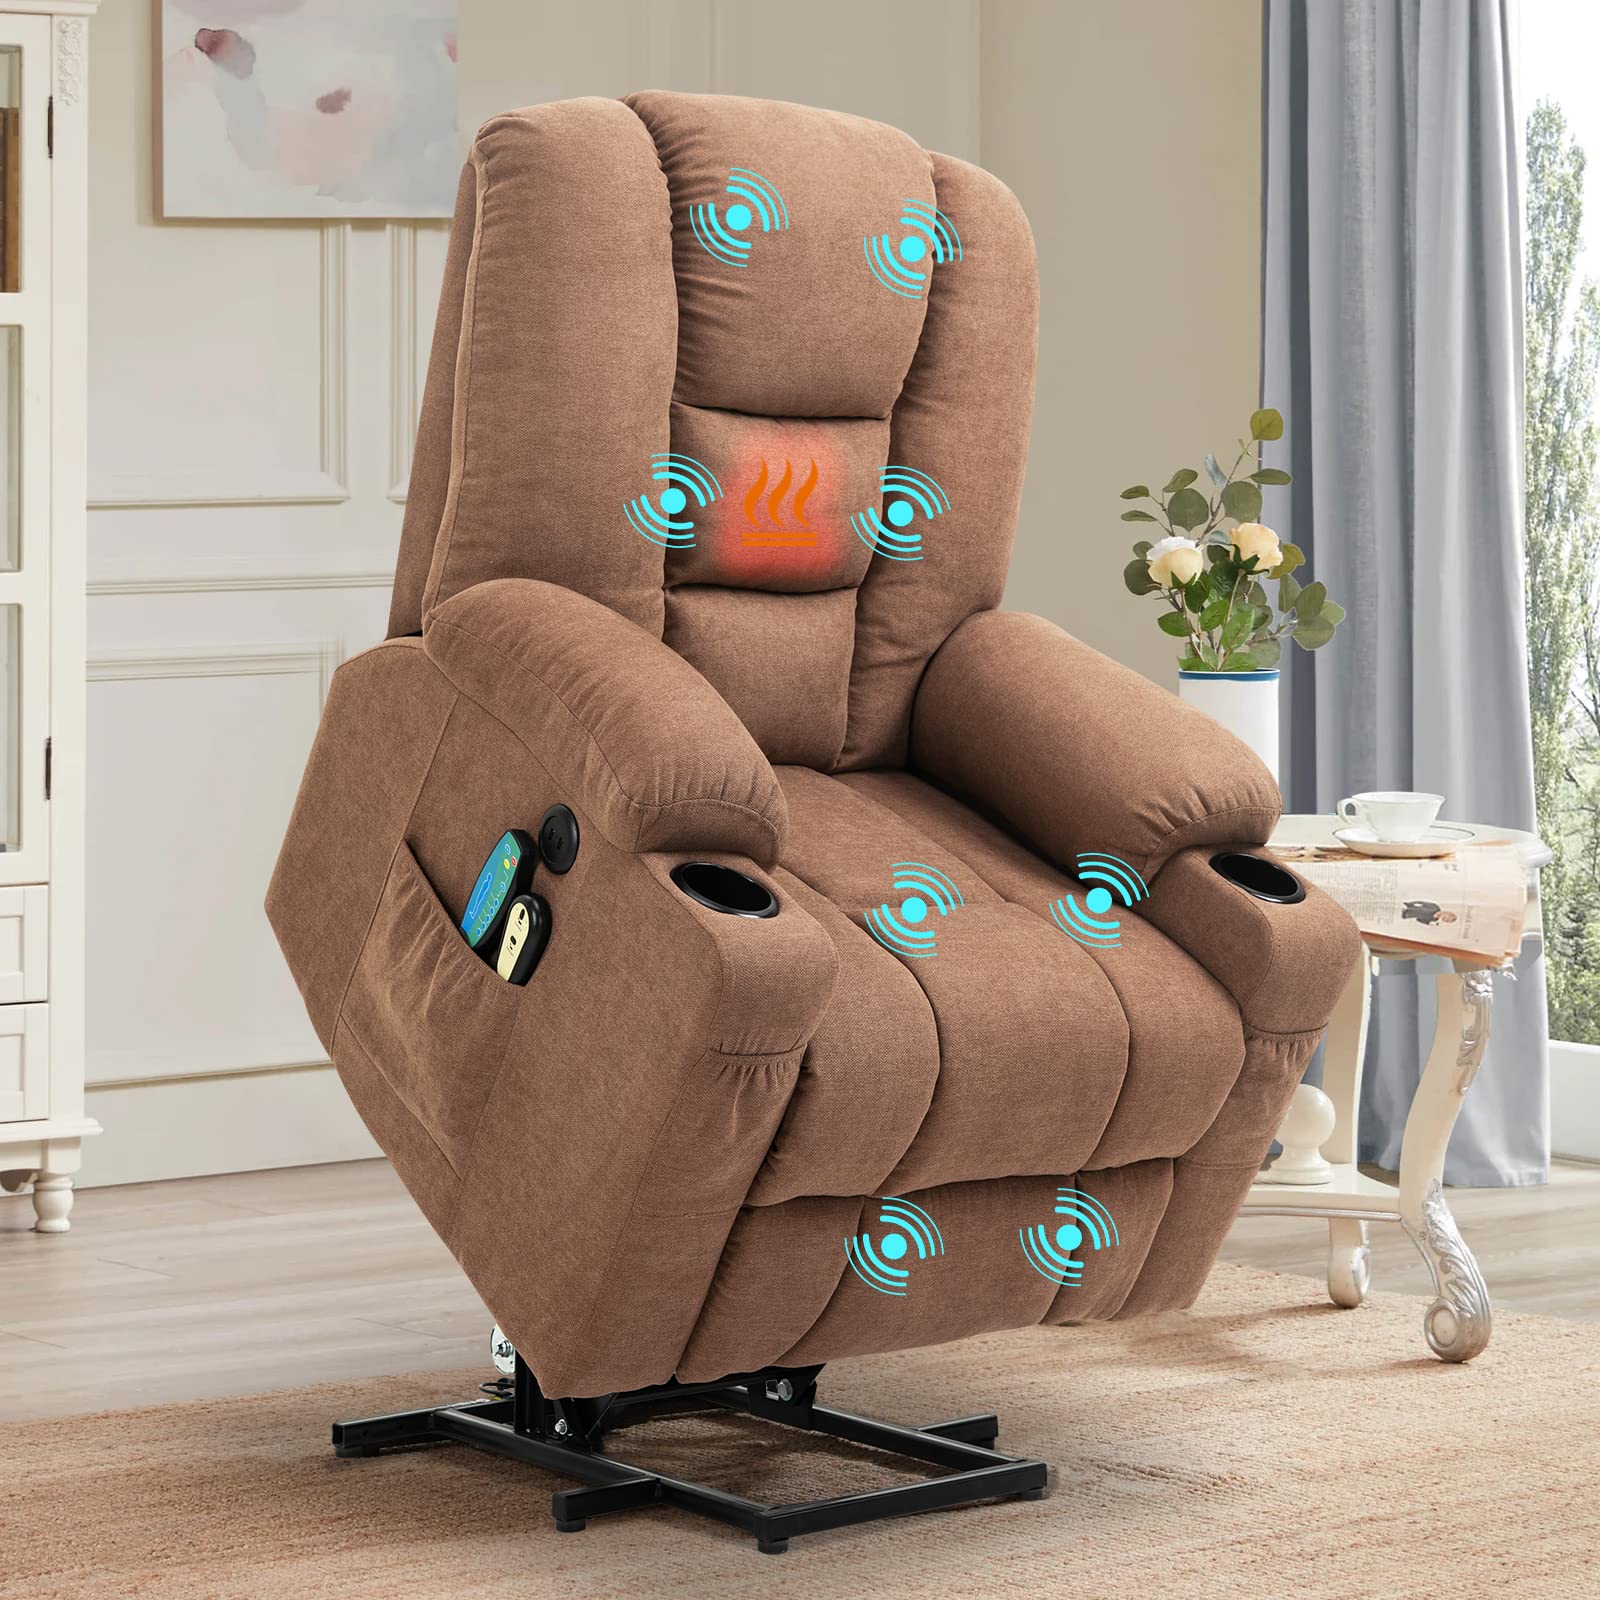 Meetwarm Power Lift Chair Electric Recliner For Elderly Heated Vibration Massage Soft Fabric Recliner Chair With 2 Remote Contro